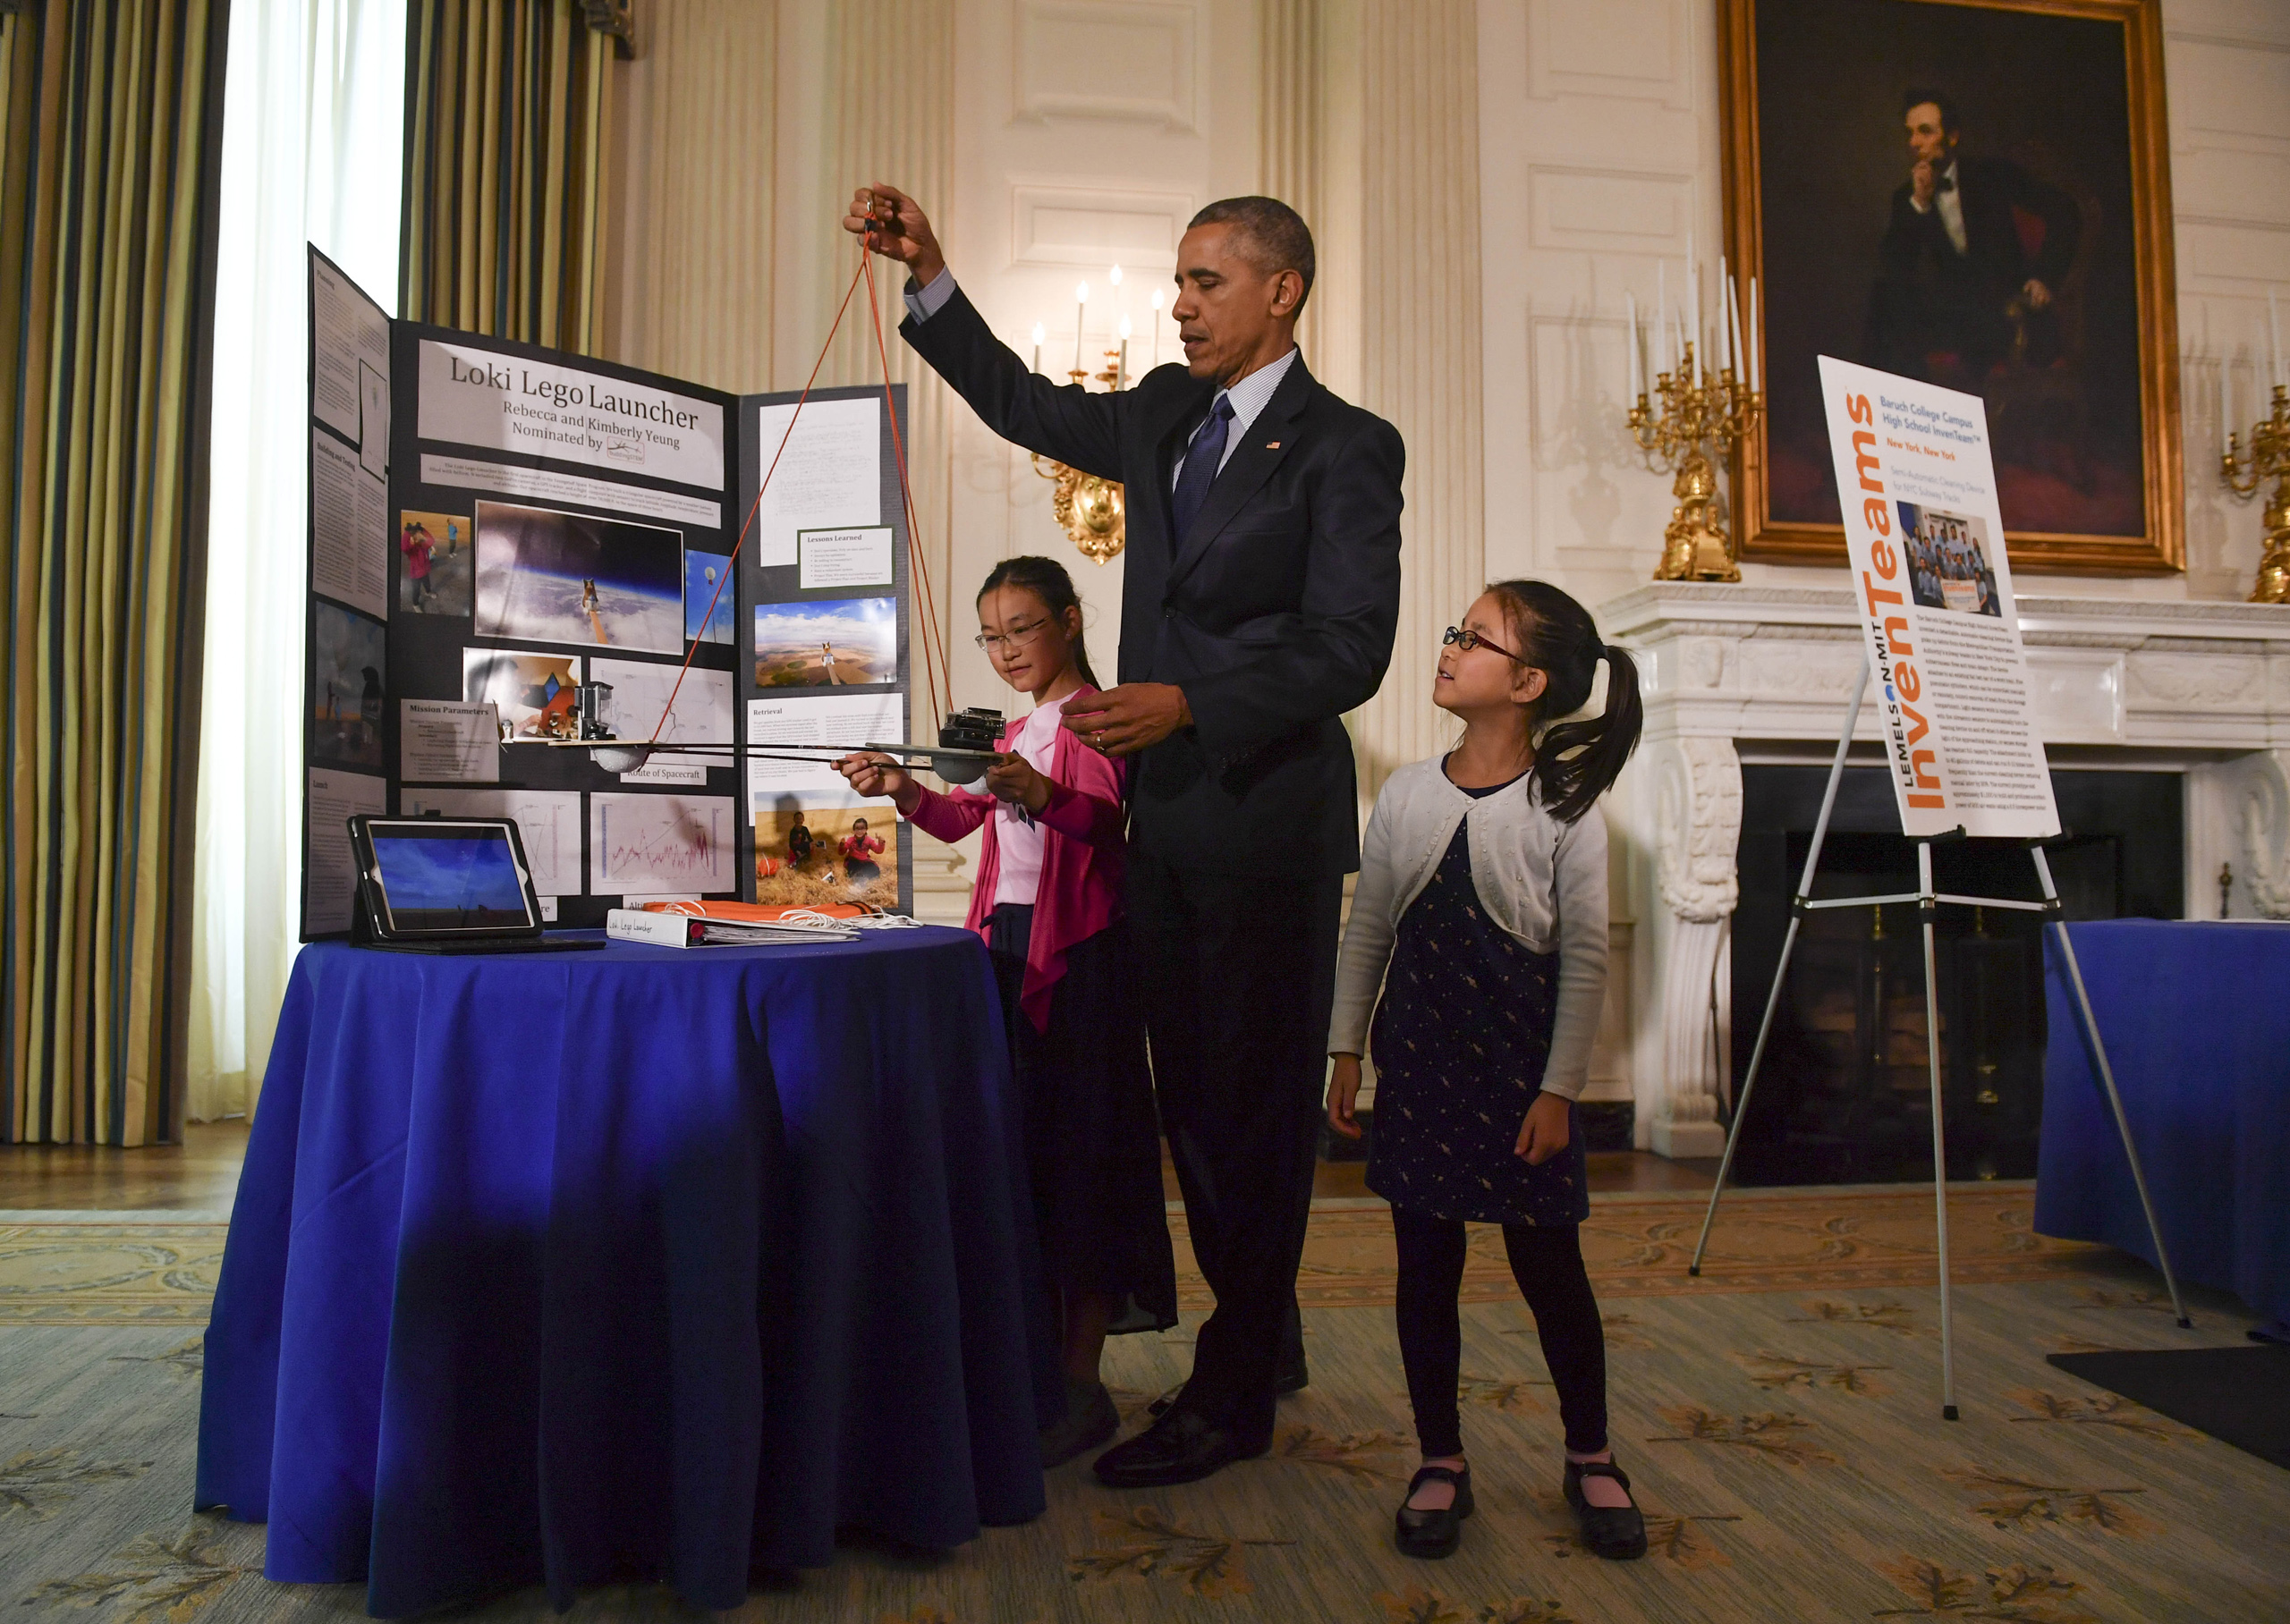 Sisters Kimberly, 9, right, and Rebecca Yeung, 11, of Seattle, WA., look on as President Barack Obama lifts their spacecraft science fair project during the sixth and final, annual White House Science Fair at The White House in Washington on April 13, 2016. (Ricky Carioti—The Washington Post/Getty Images)